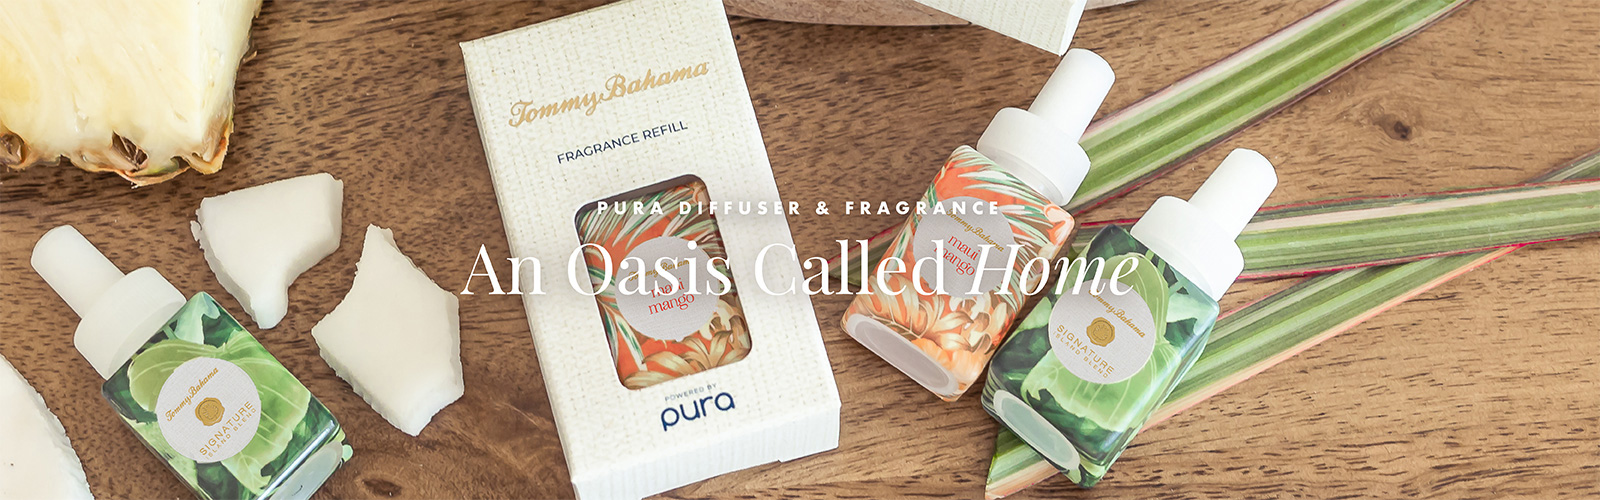 Pura Diffuser & Fragrance - An Oasis Called Home